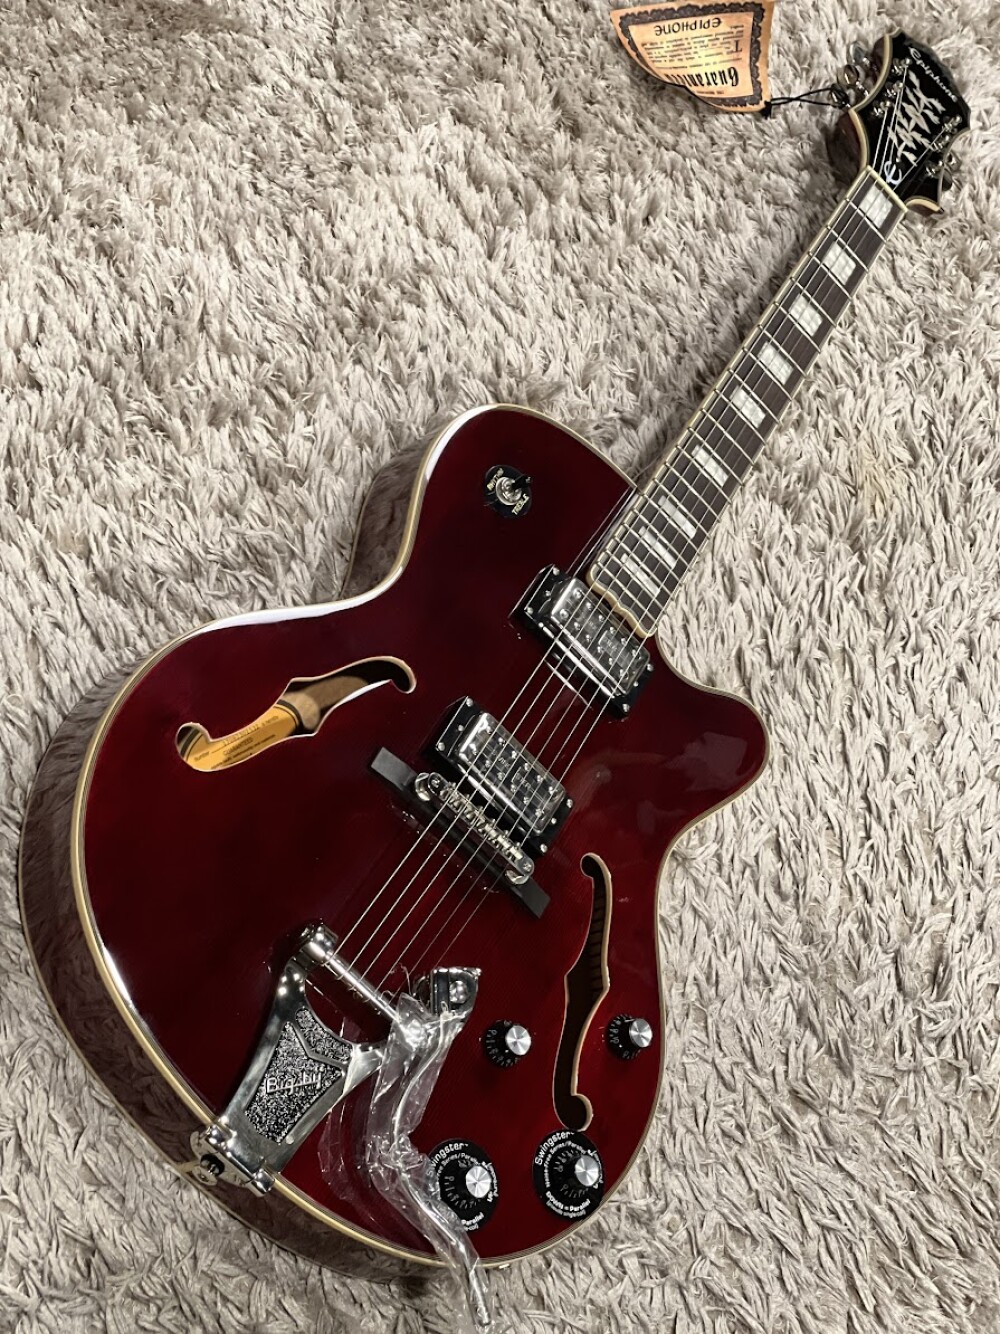 Epiphone Emperor Swingster Hollowbody with Rosewood Neck in Wine Red